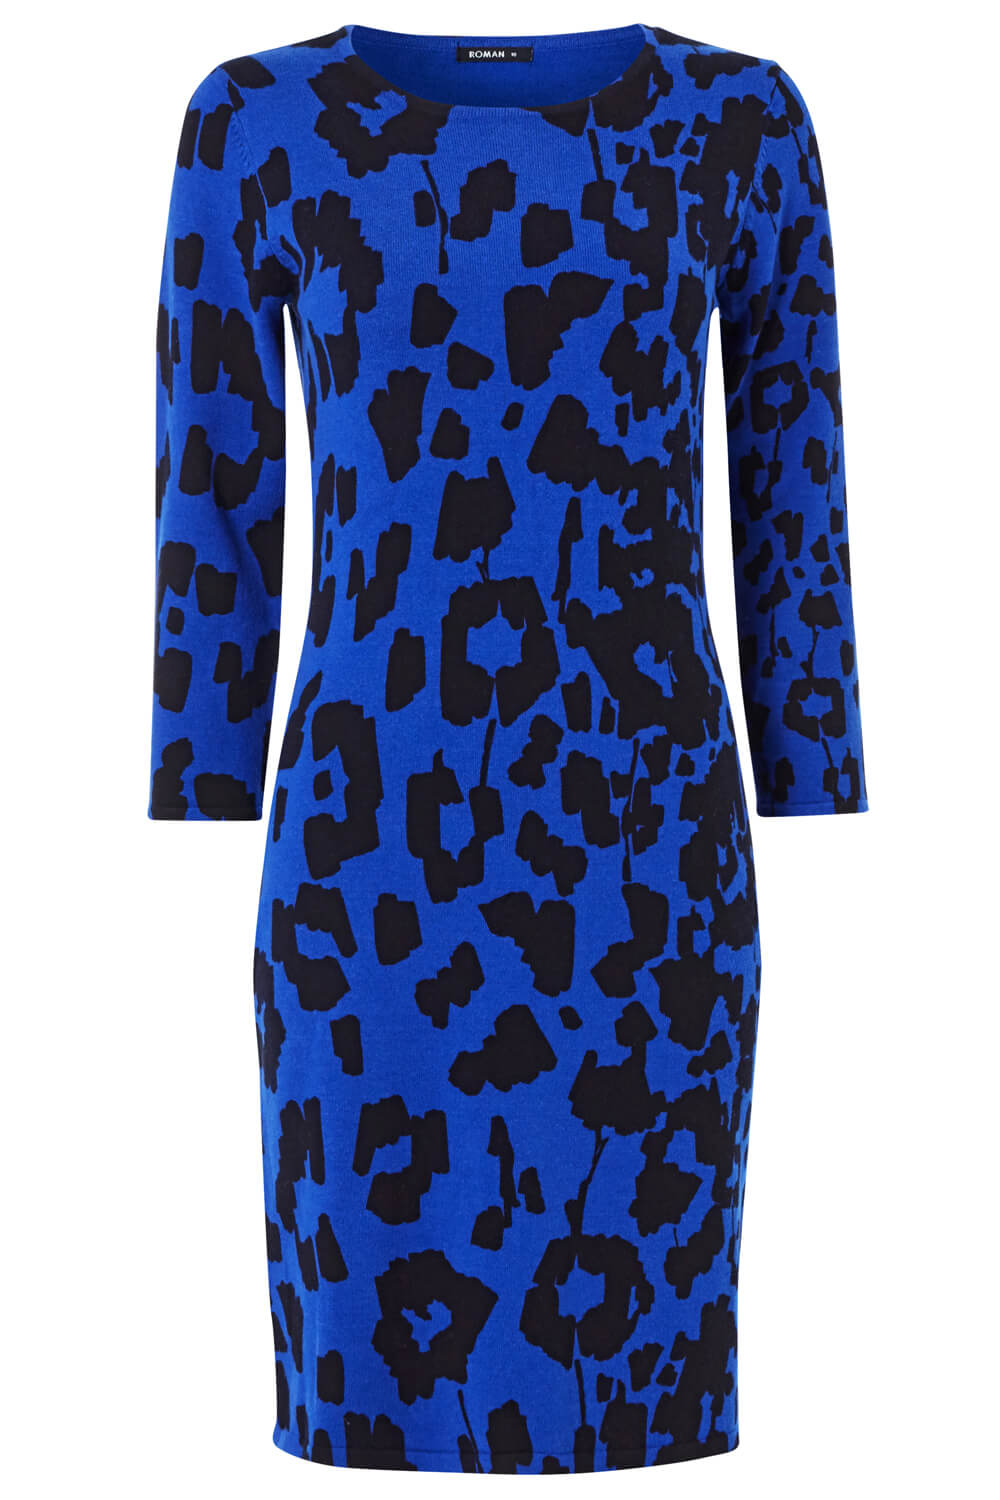 Royal Blue Leopard Print Knitted Dress, Image 4 of 4